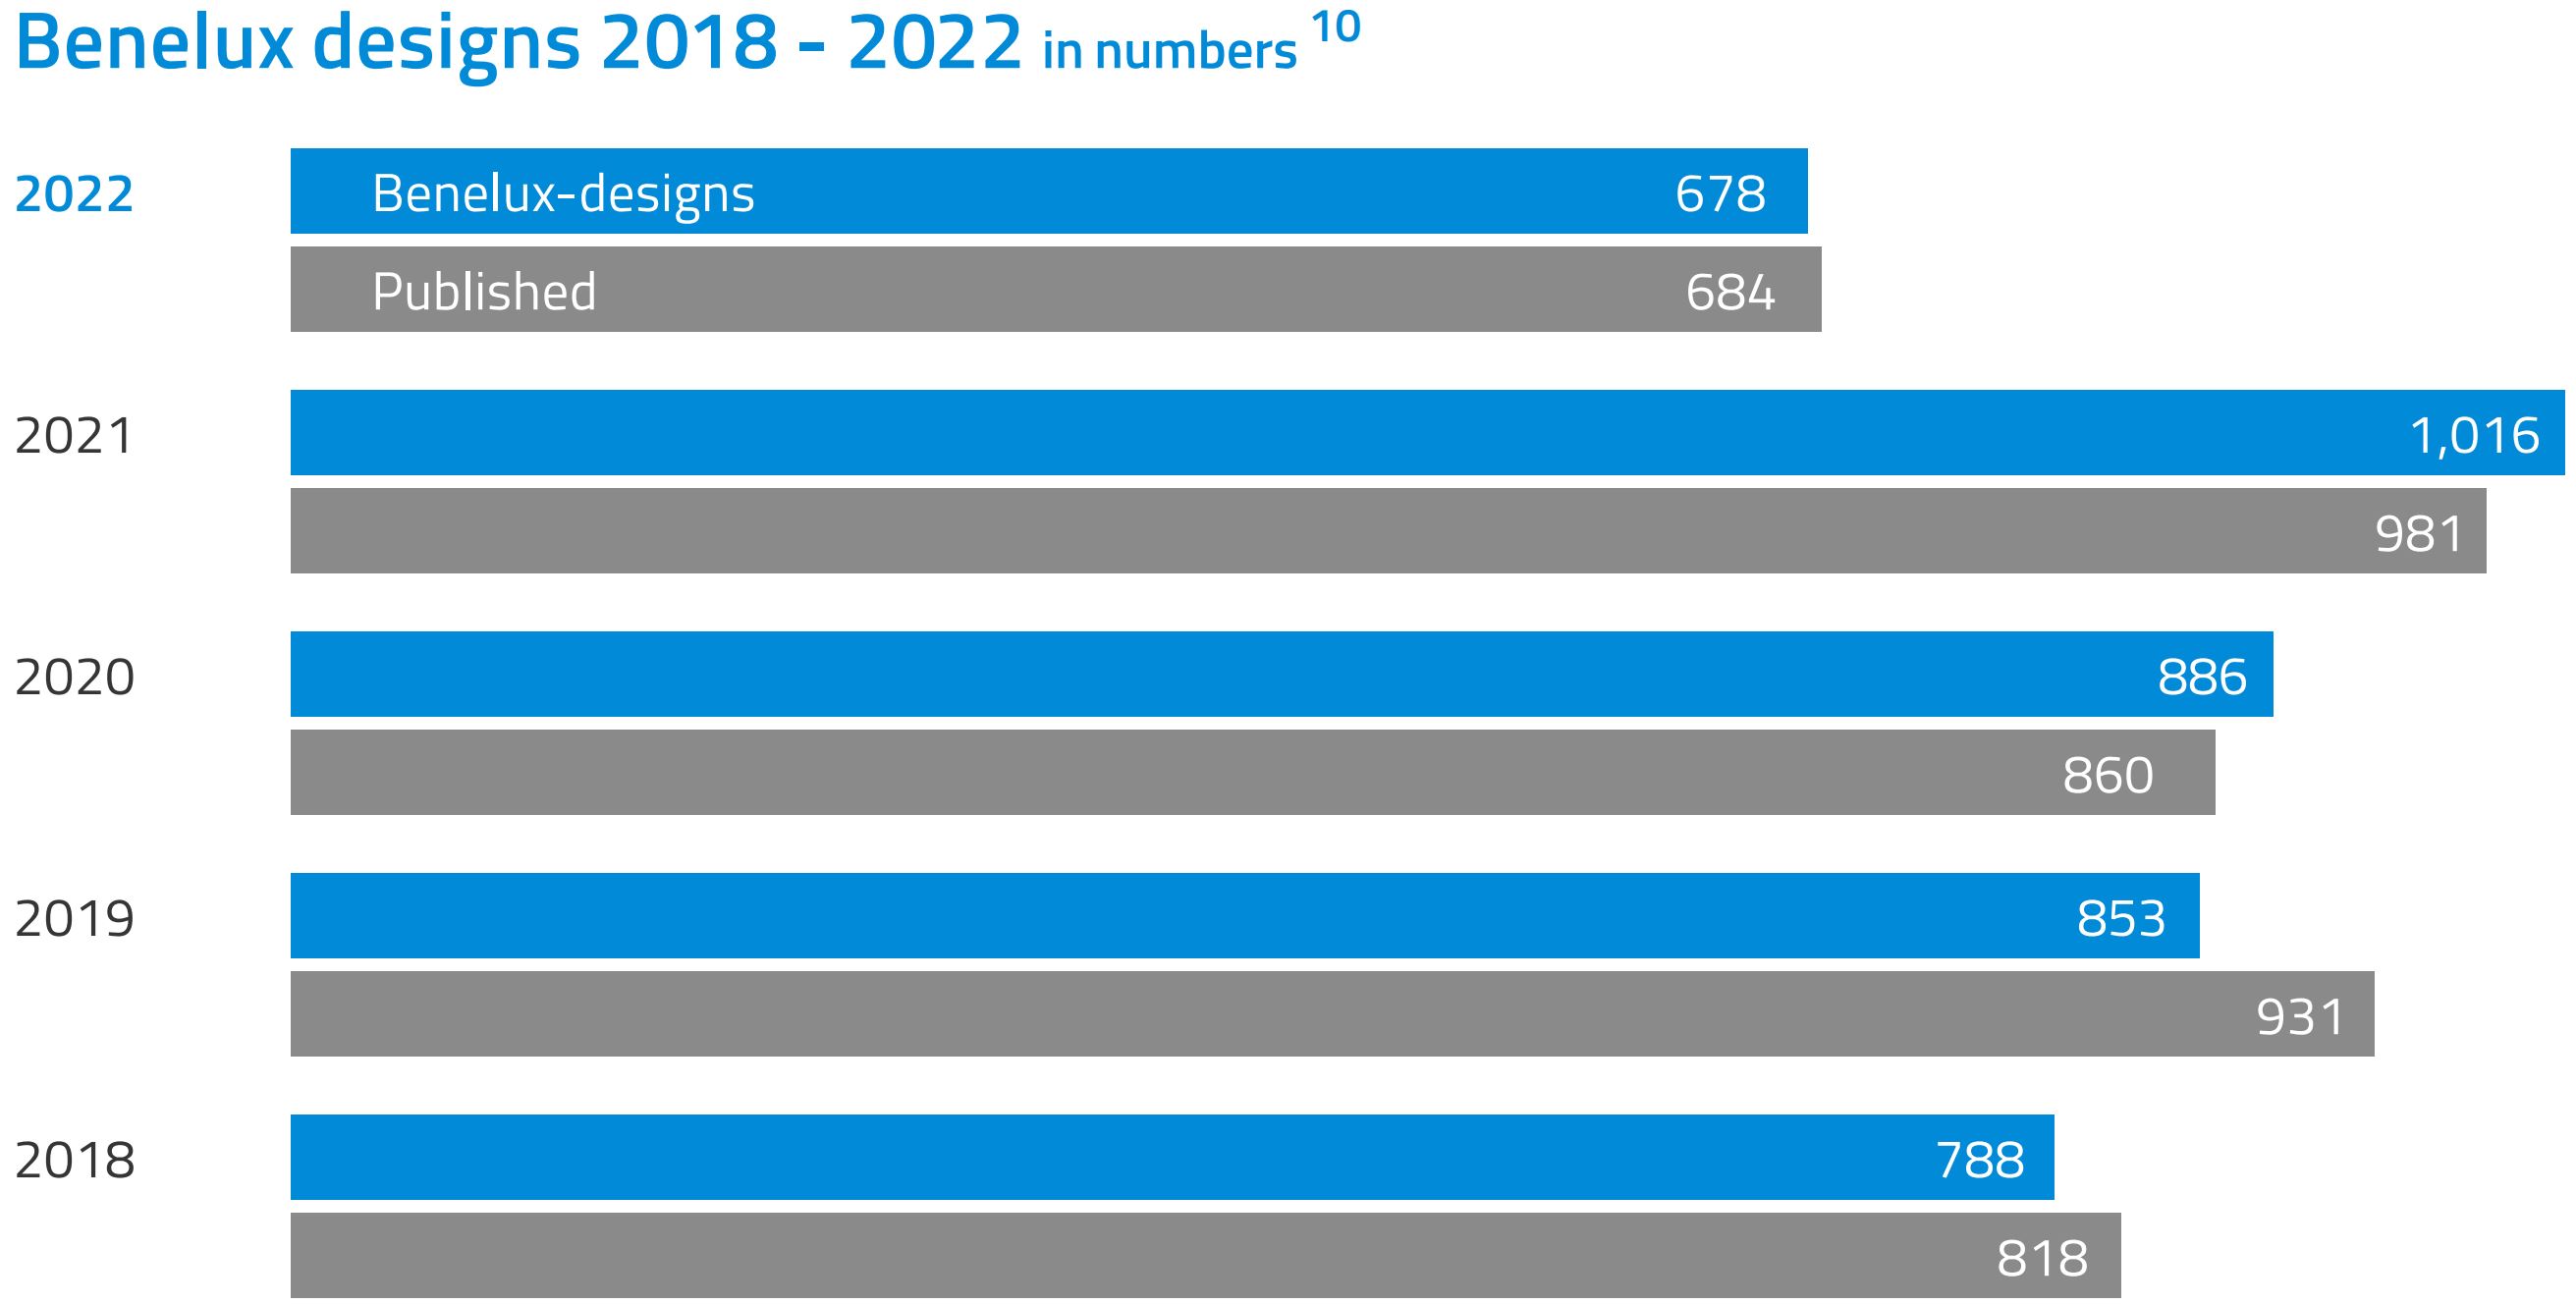 Bar chart Benelux designs 2018-2022 in numbers. Key results: 2022, Benelux designs: 678, published: 684. This is both less than the previous 4 years.